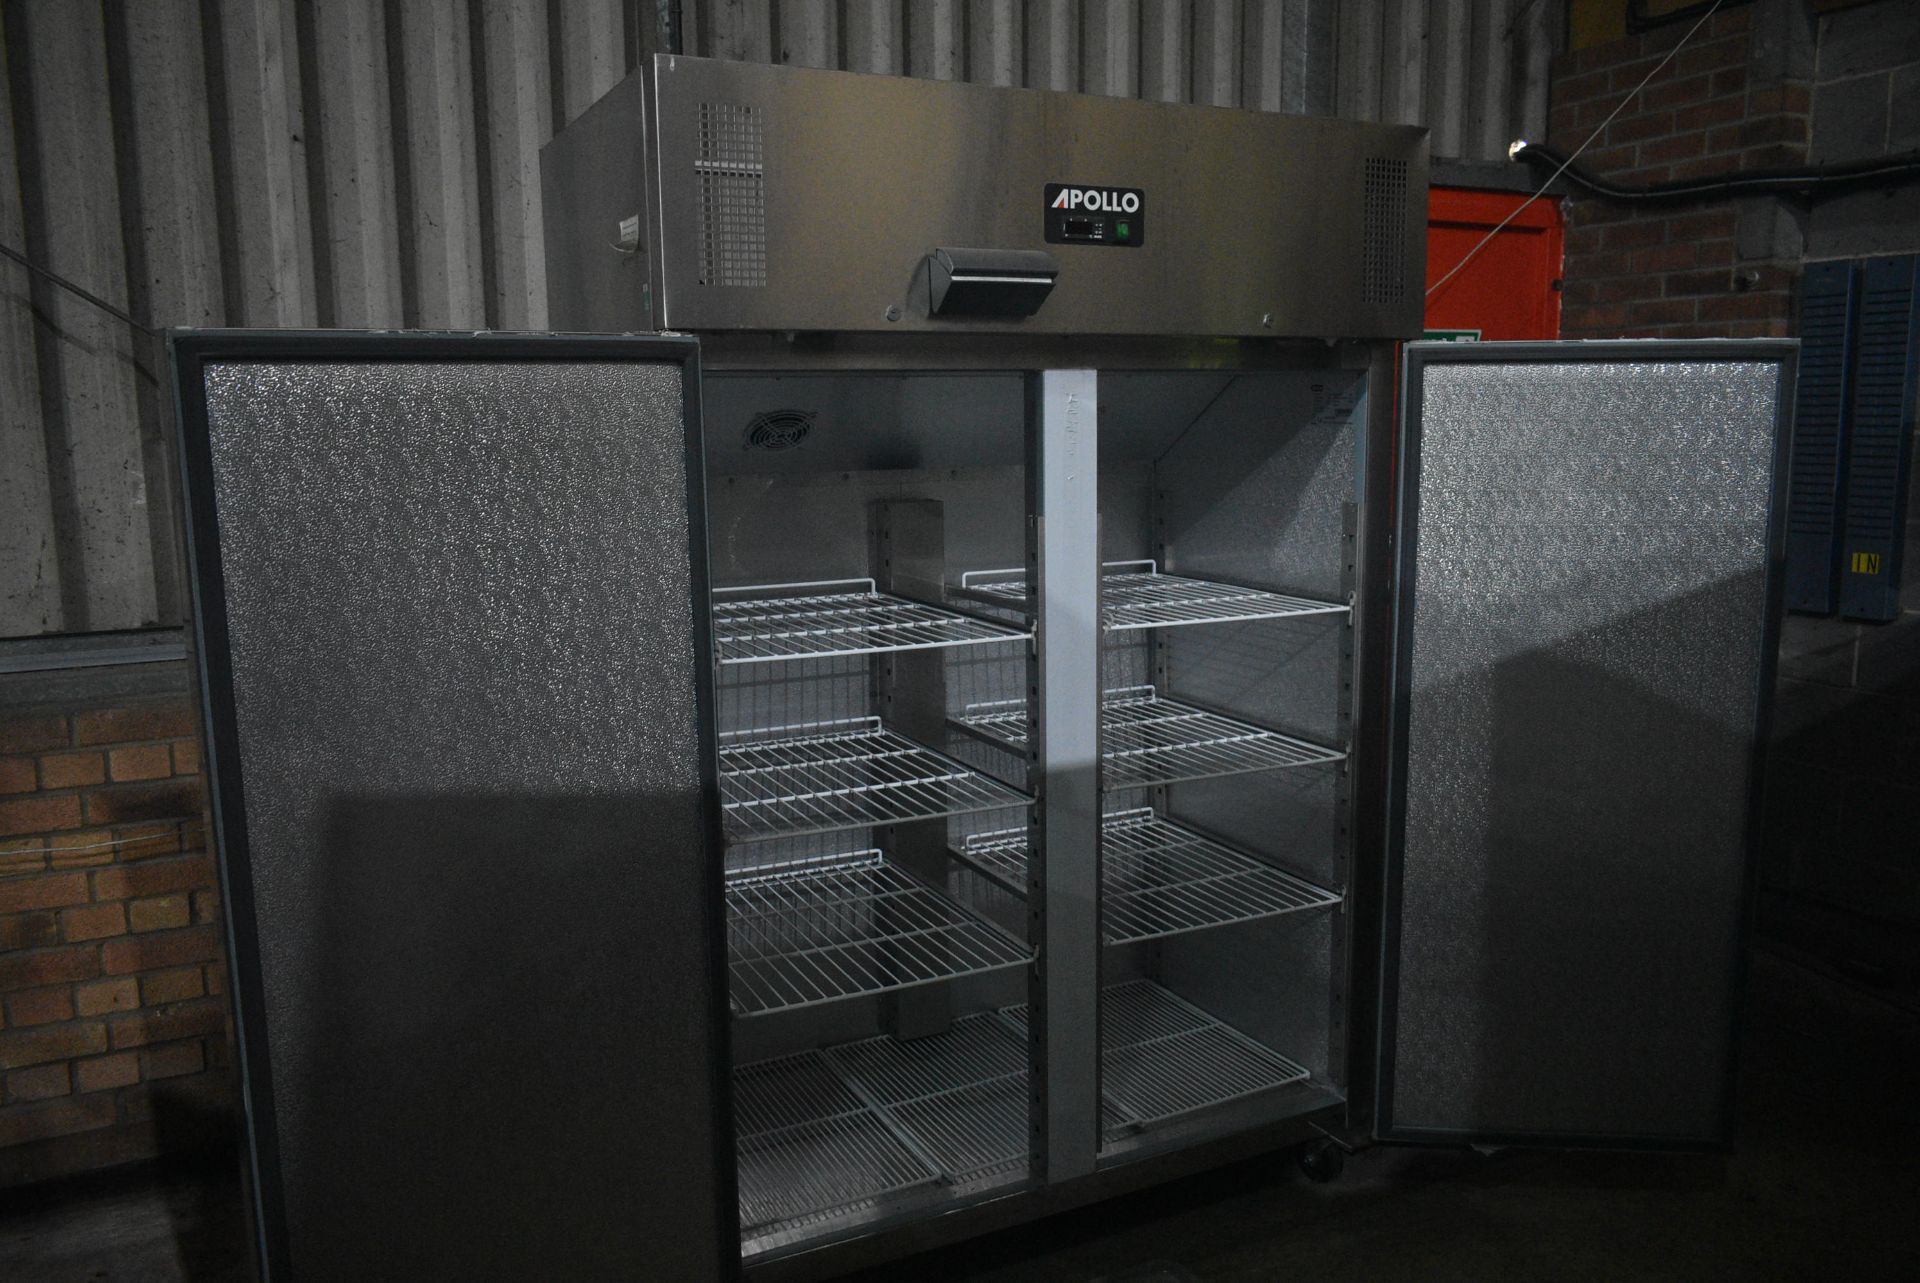 Apollo ADR1200 DOUBLE DOOR REFRIGERATOR, internal dimensions approx. 1.2m x 650mm x 1.4m high ( - Image 3 of 5